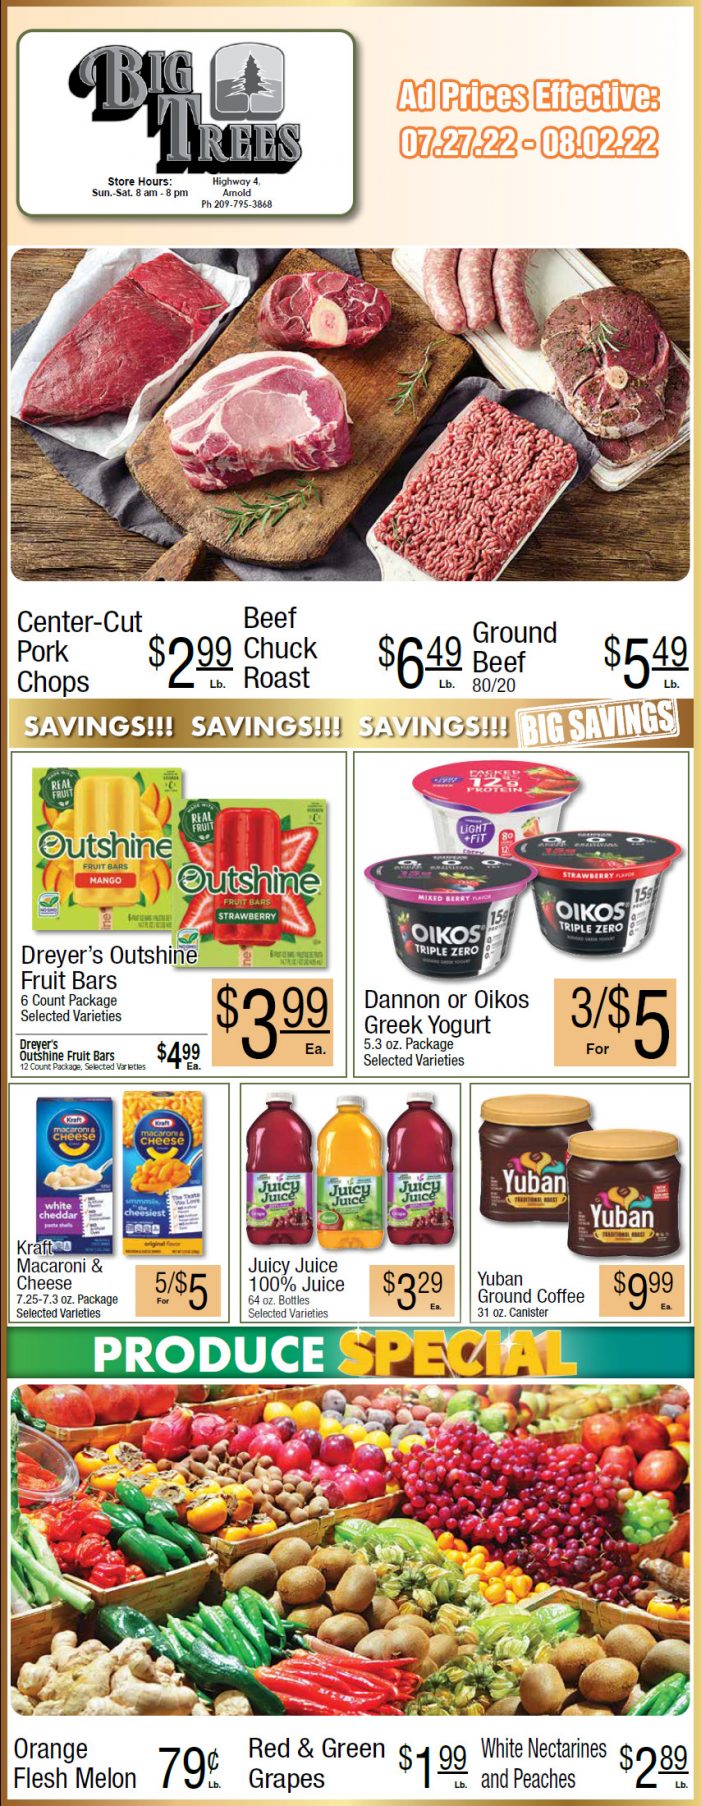 Big Trees Market Weekly Ad & Grocery Specials July 27 – August 2!  Shop Local & Save for Summer!!